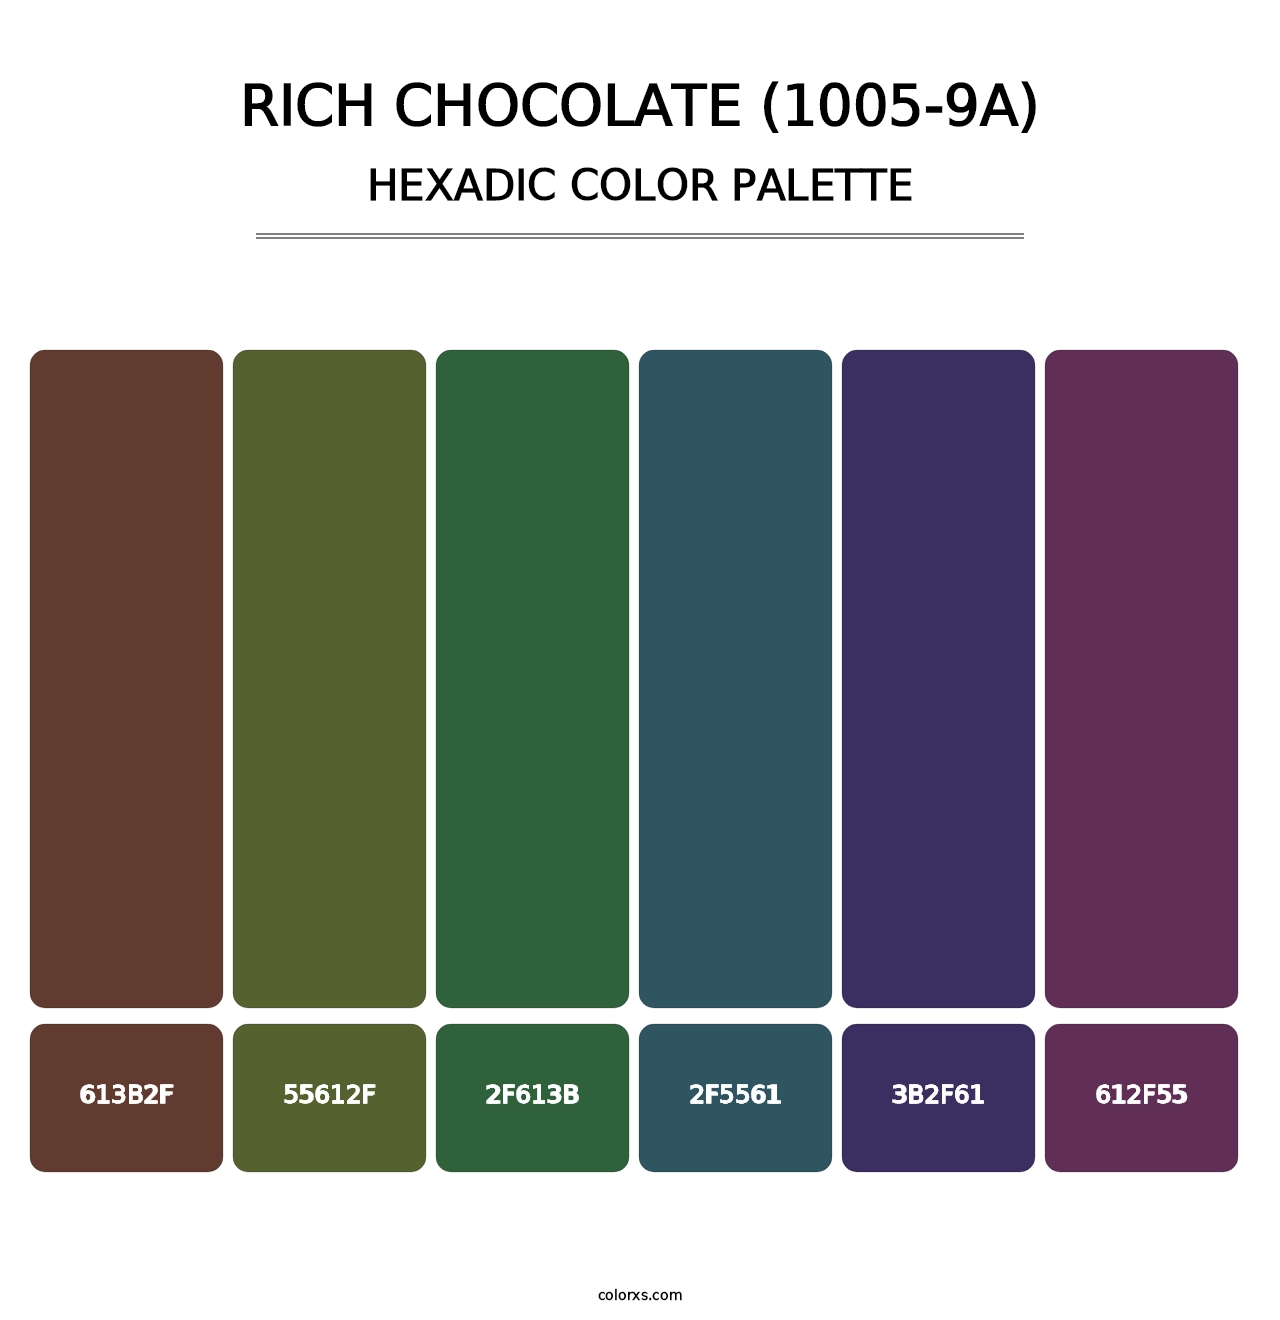 Rich Chocolate (1005-9A) - Hexadic Color Palette